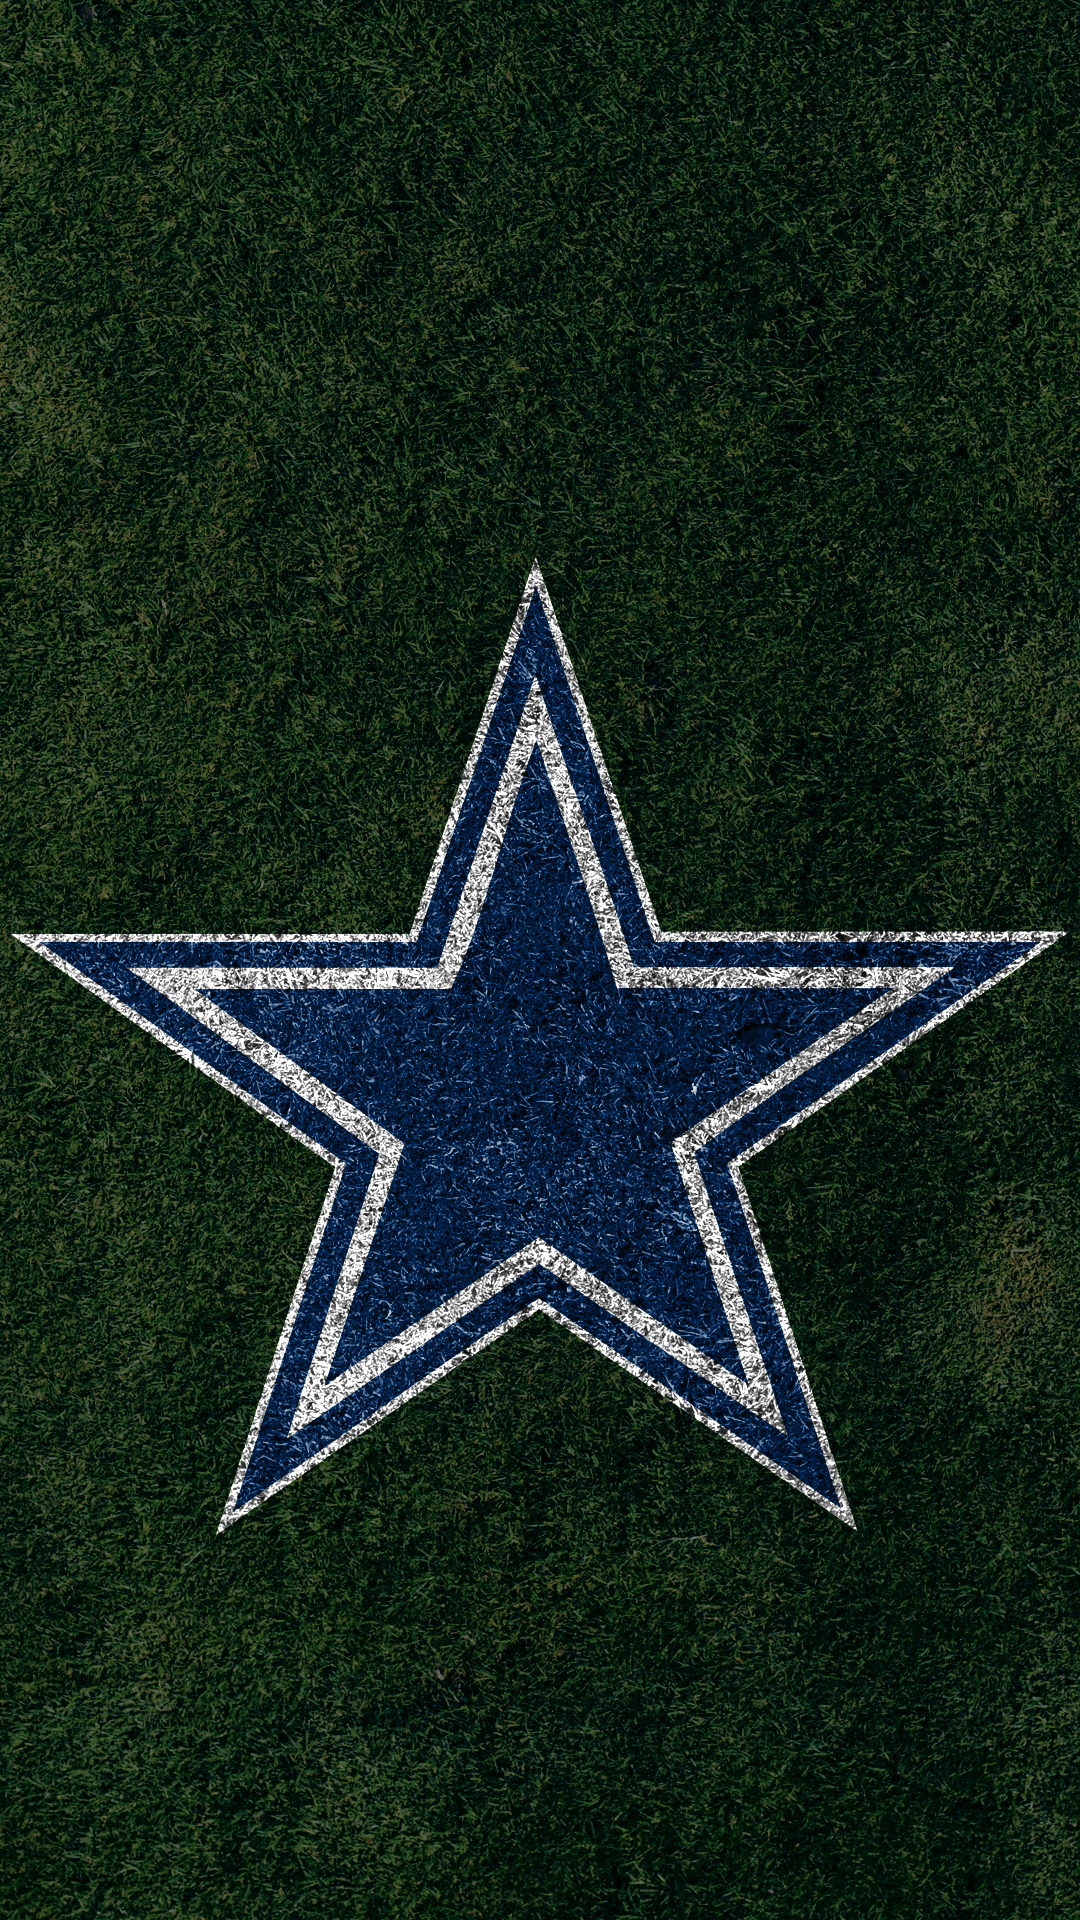 Coolest wallpapers ever for Dallas Cowboys …